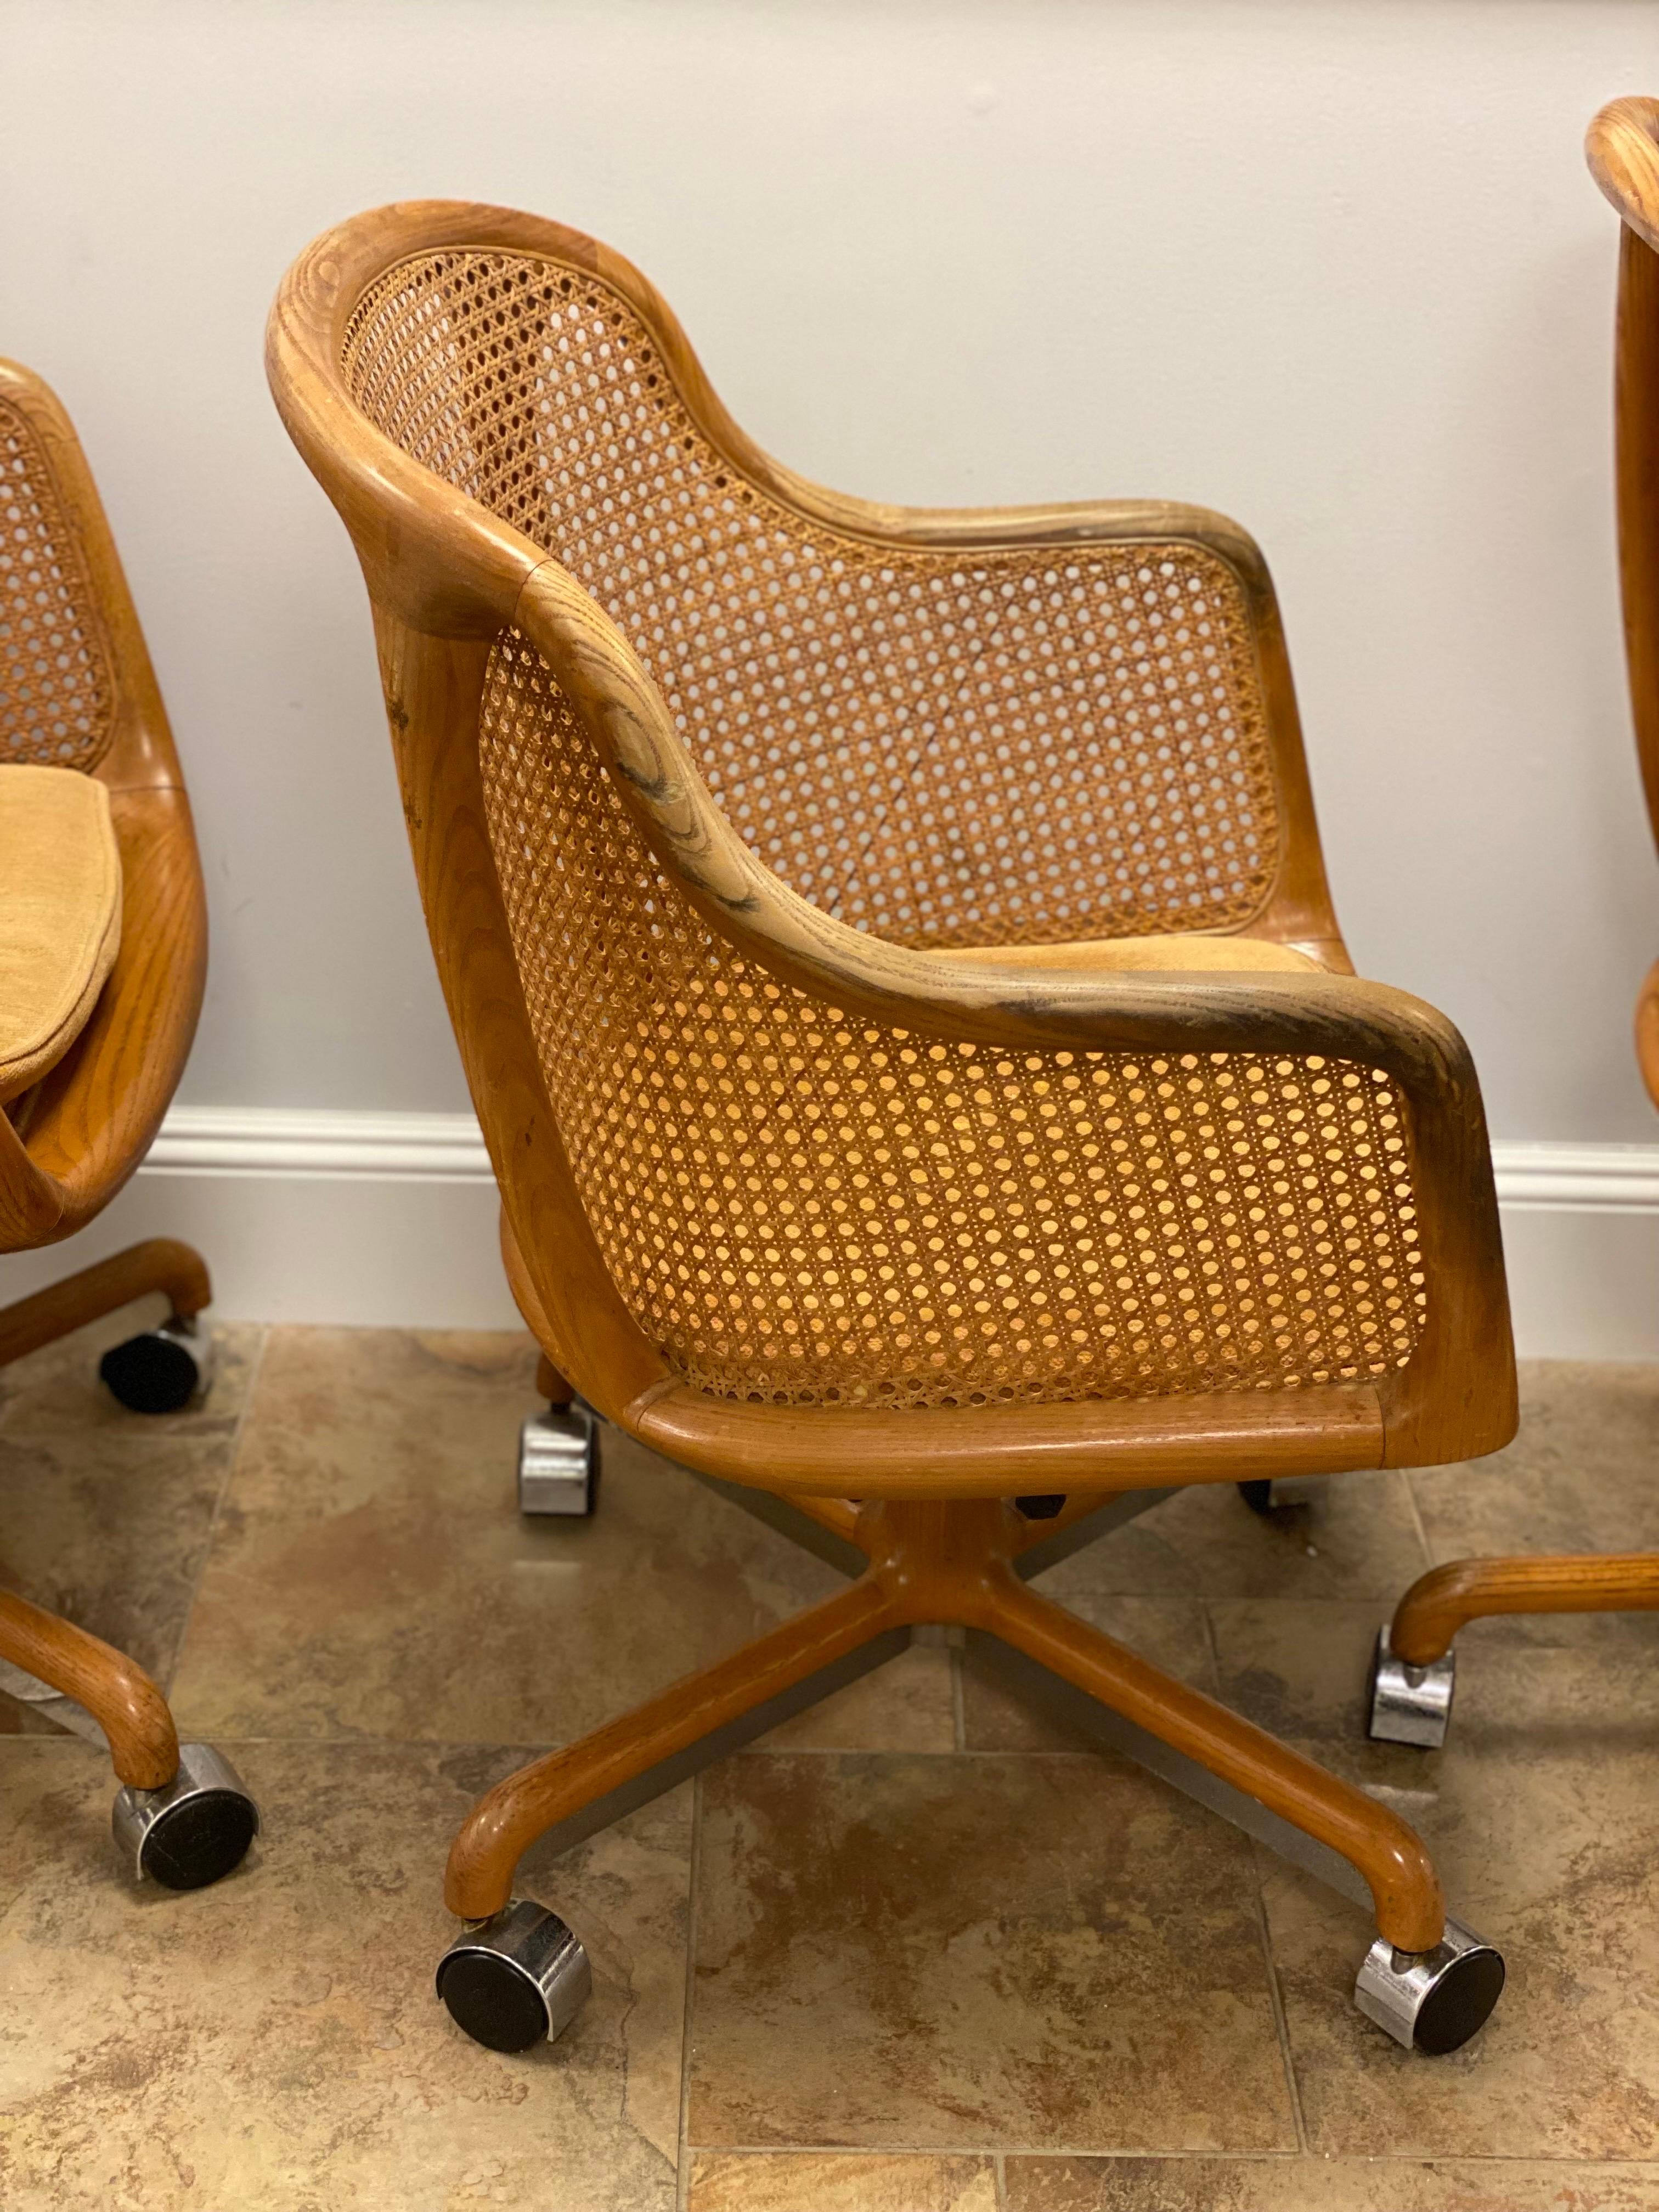 Caned Desk Chair by Ward Bennett for Brickel, Mid-20th Century For Sale 3